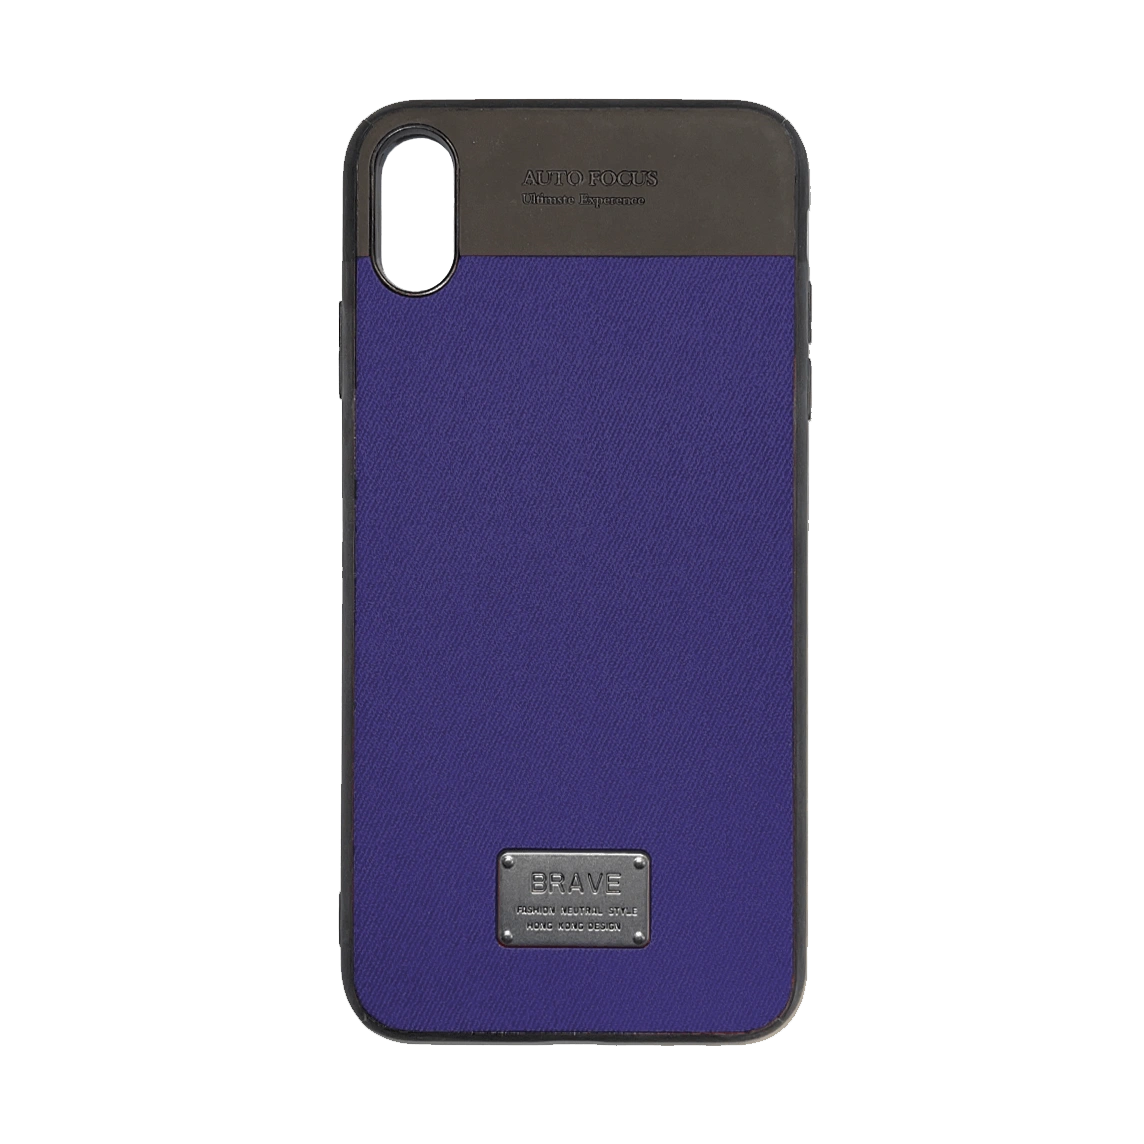 S&G Brave Case For iPhone XS Max